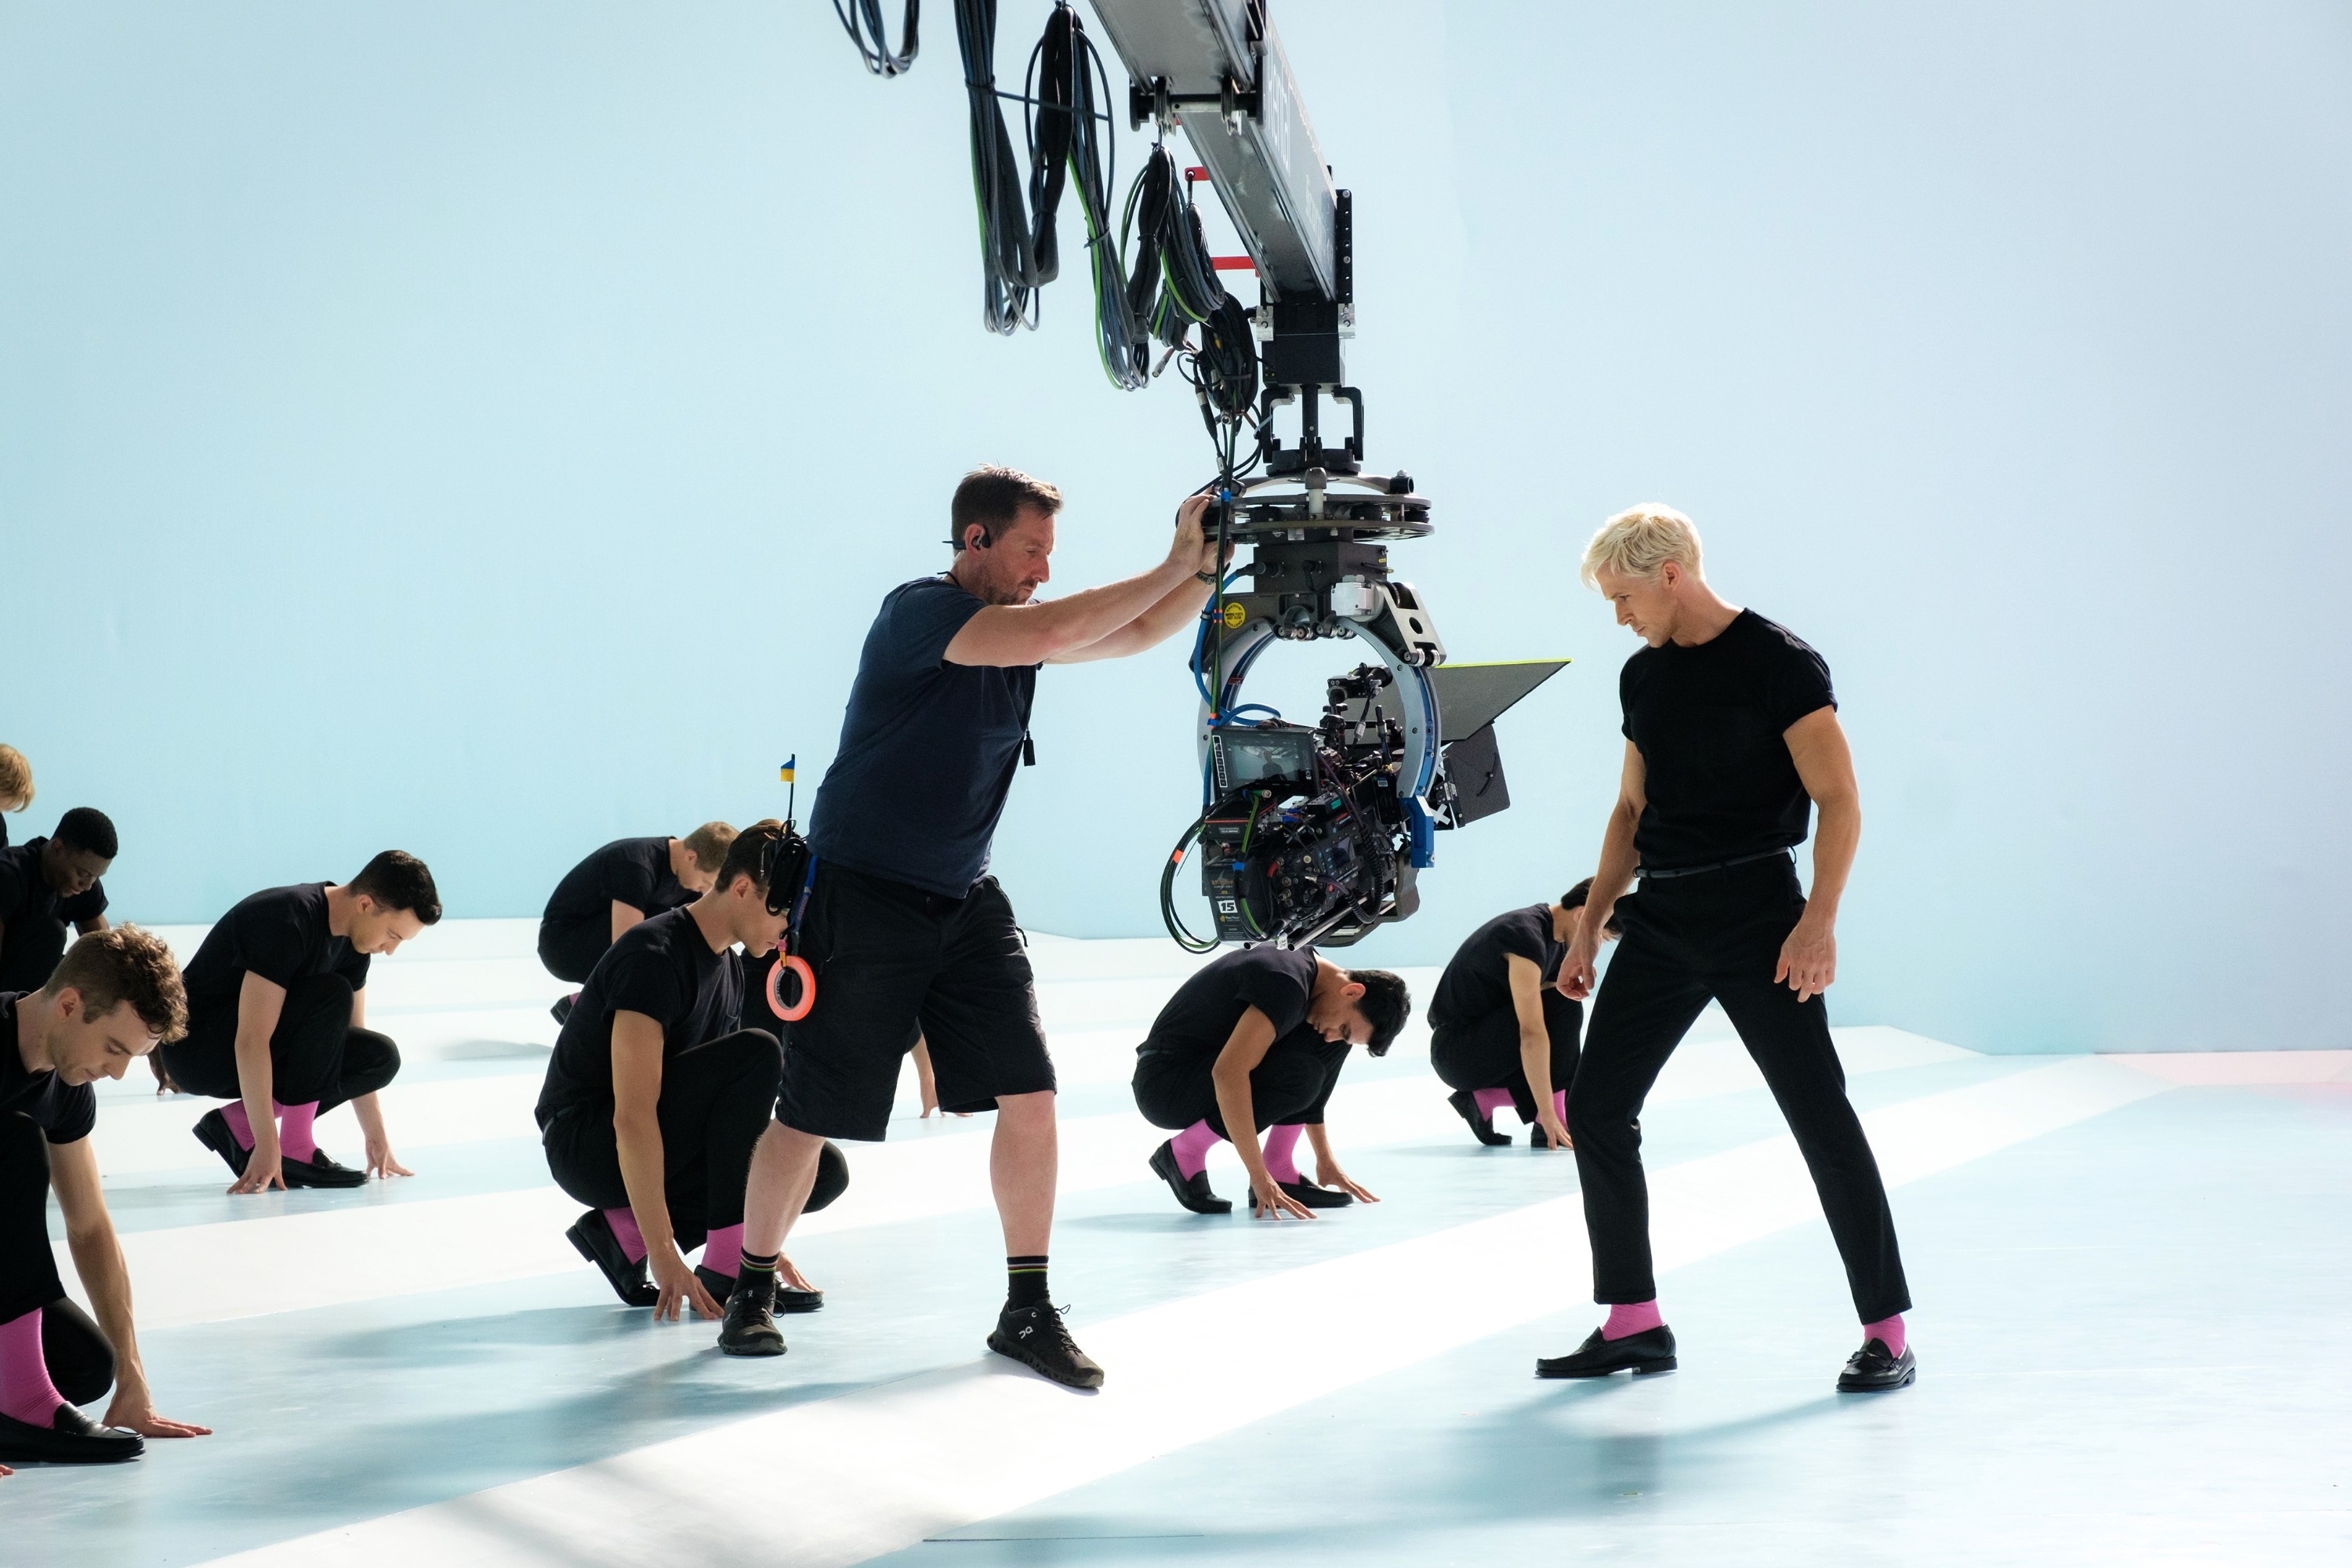 Crew filming a dance scene with a cameraman operating equipment and dancers in synchronised poses in the background